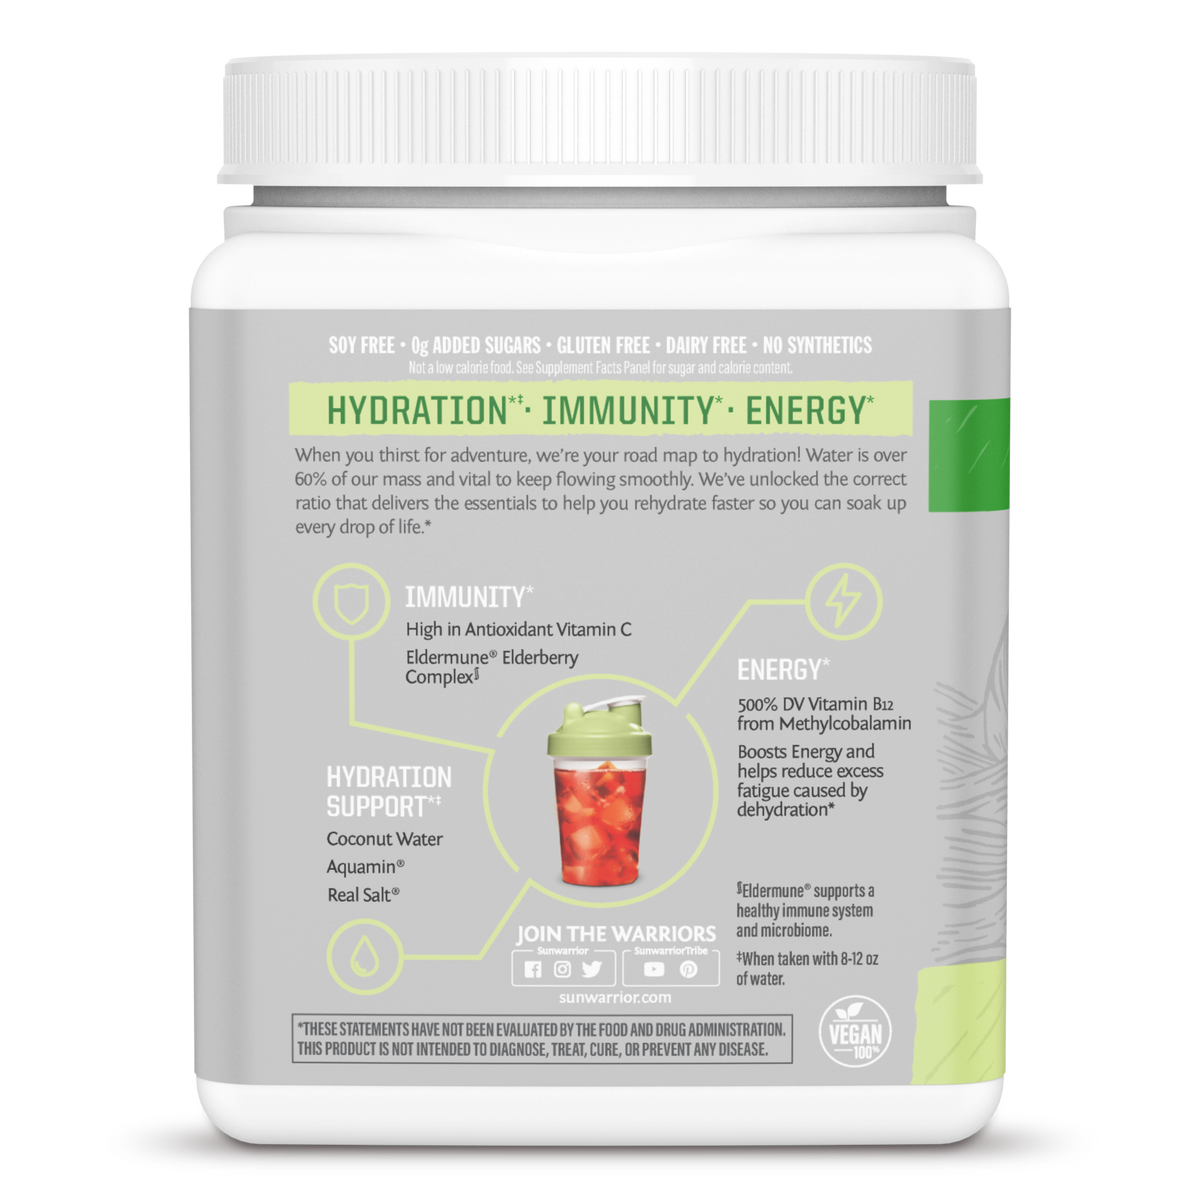 Hydration Cucumber Lime (480G)